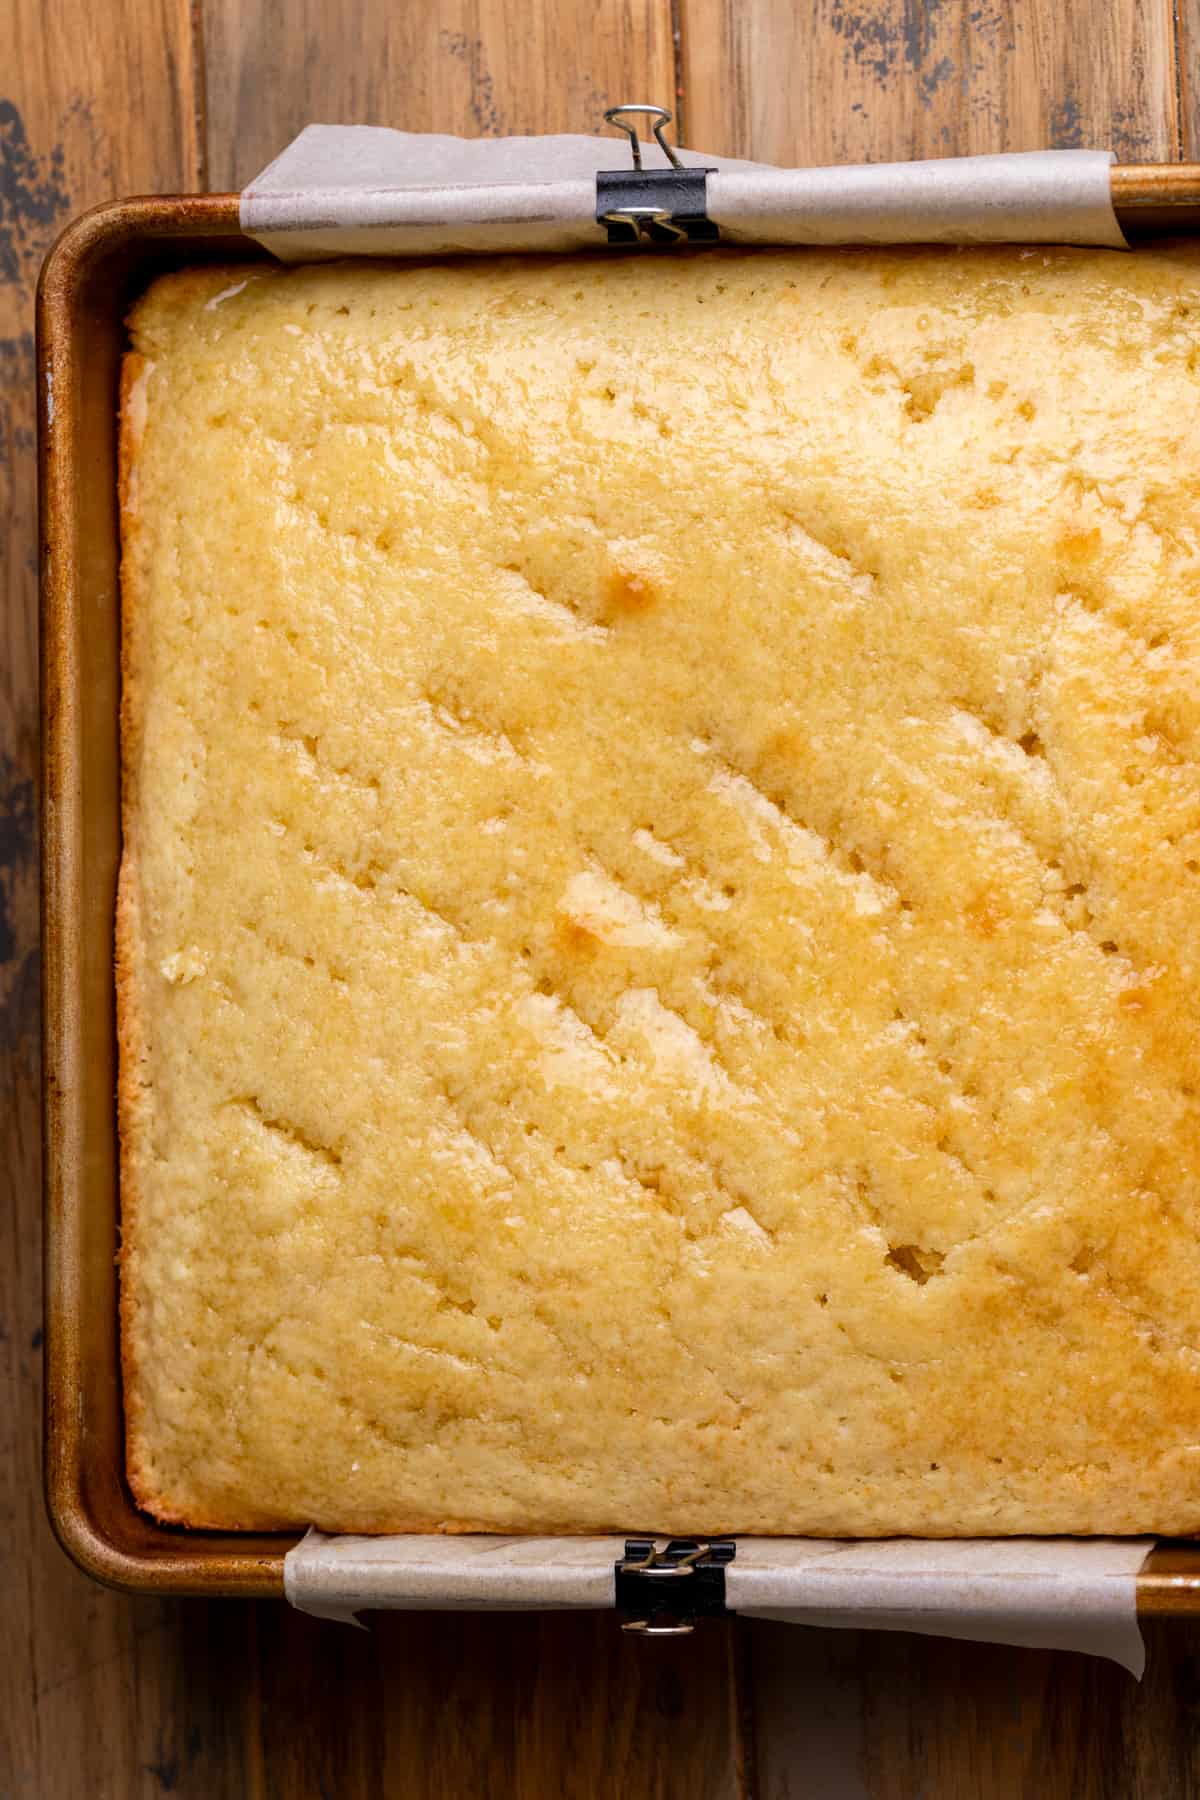 Baked cake with the lemon syrup poked in.